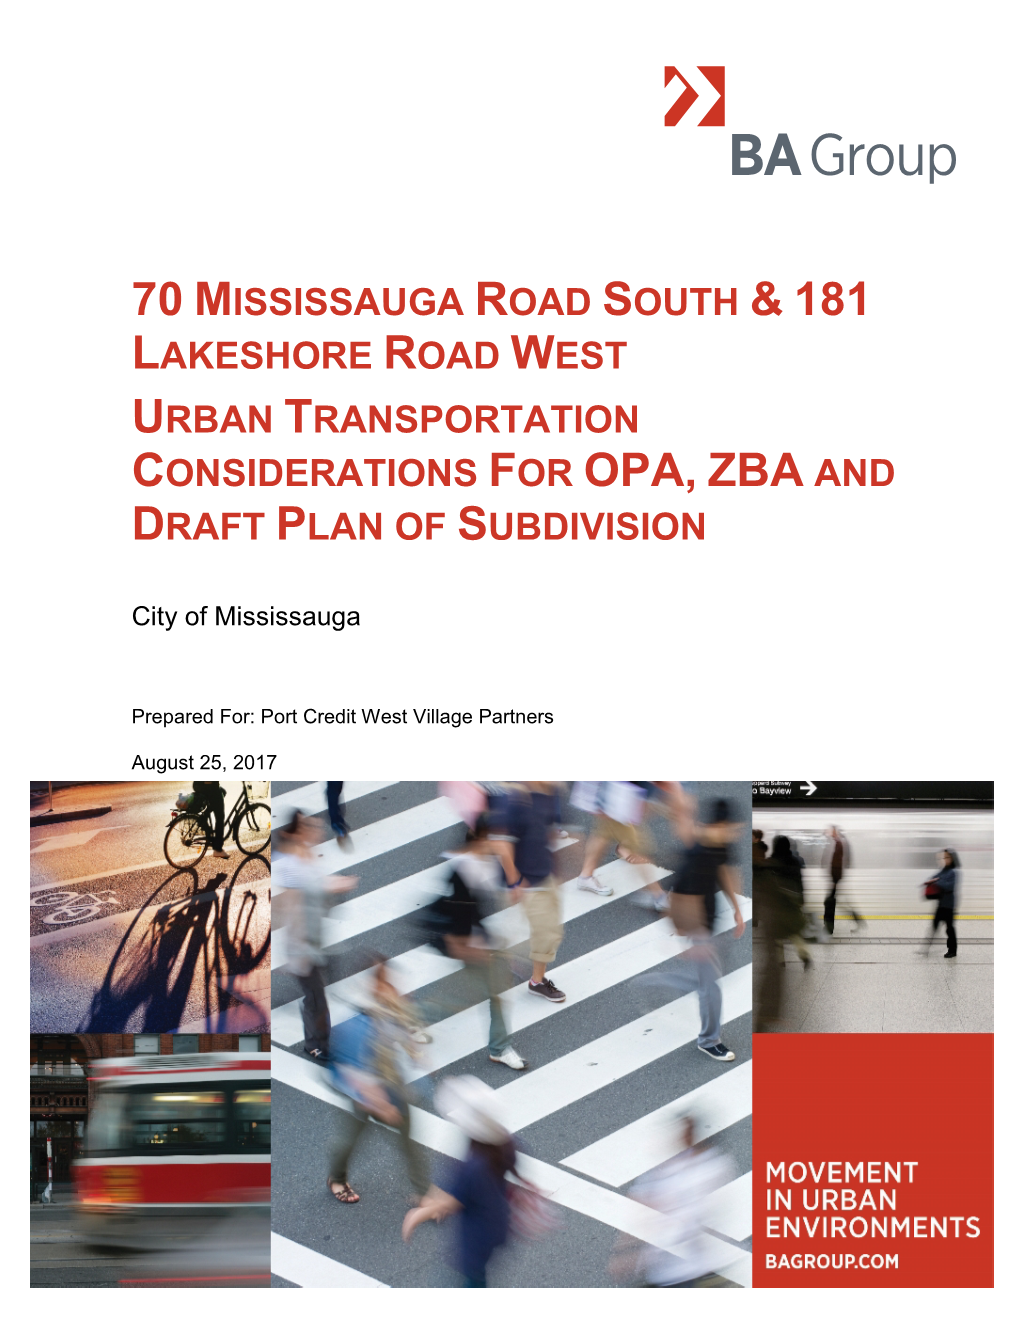 Urban Transportation Considerations for Opa, Zba and Draft Plan of Subdivision